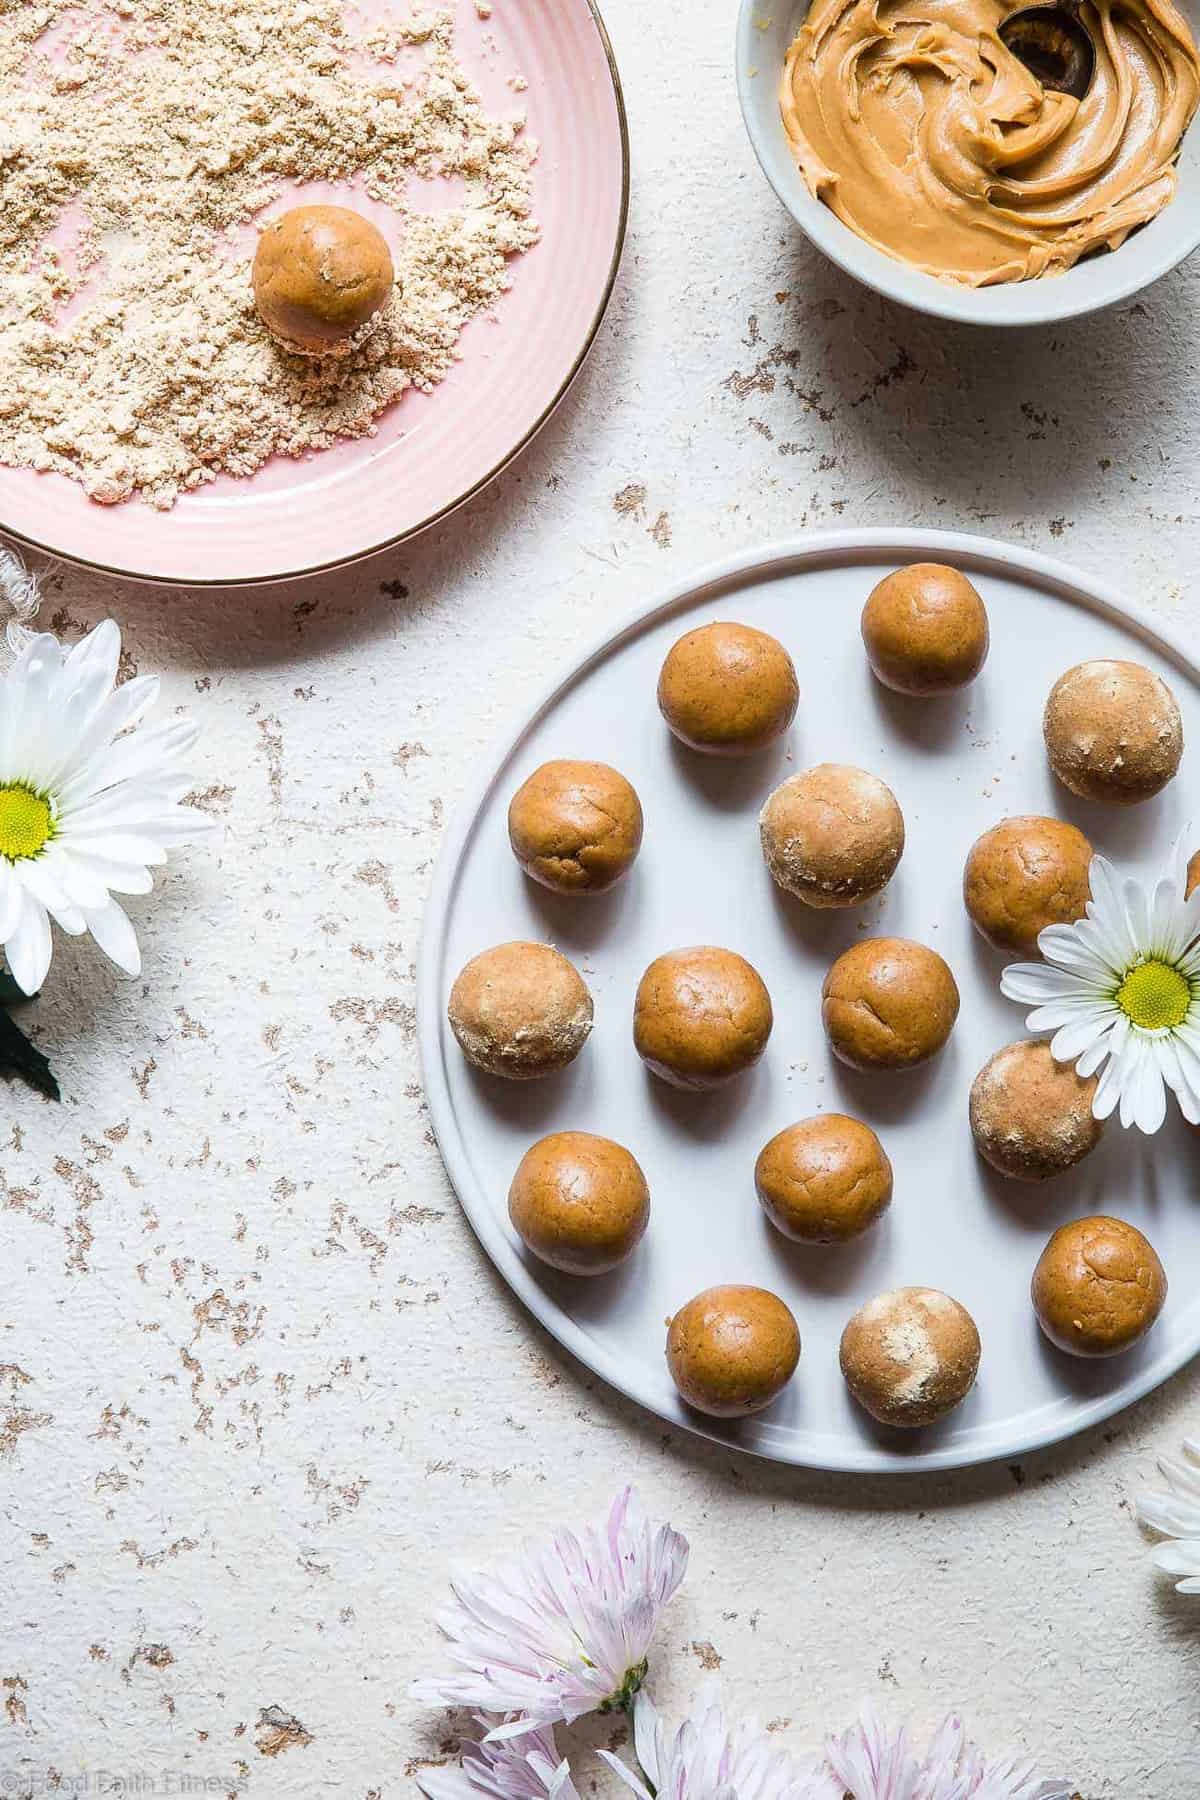 Peanut Butter Protein Healthy Cookie Dough Balls Recipe - This easy recipe is only 4 ingredients and take 10 mins! Gluten free, dairy free and PACKED with protein too! A healthy snack for kids or adults! | #Foodfaithfitness | #Glutenfree #Dairyfree #PeanutButter #Healthy #CookieDough